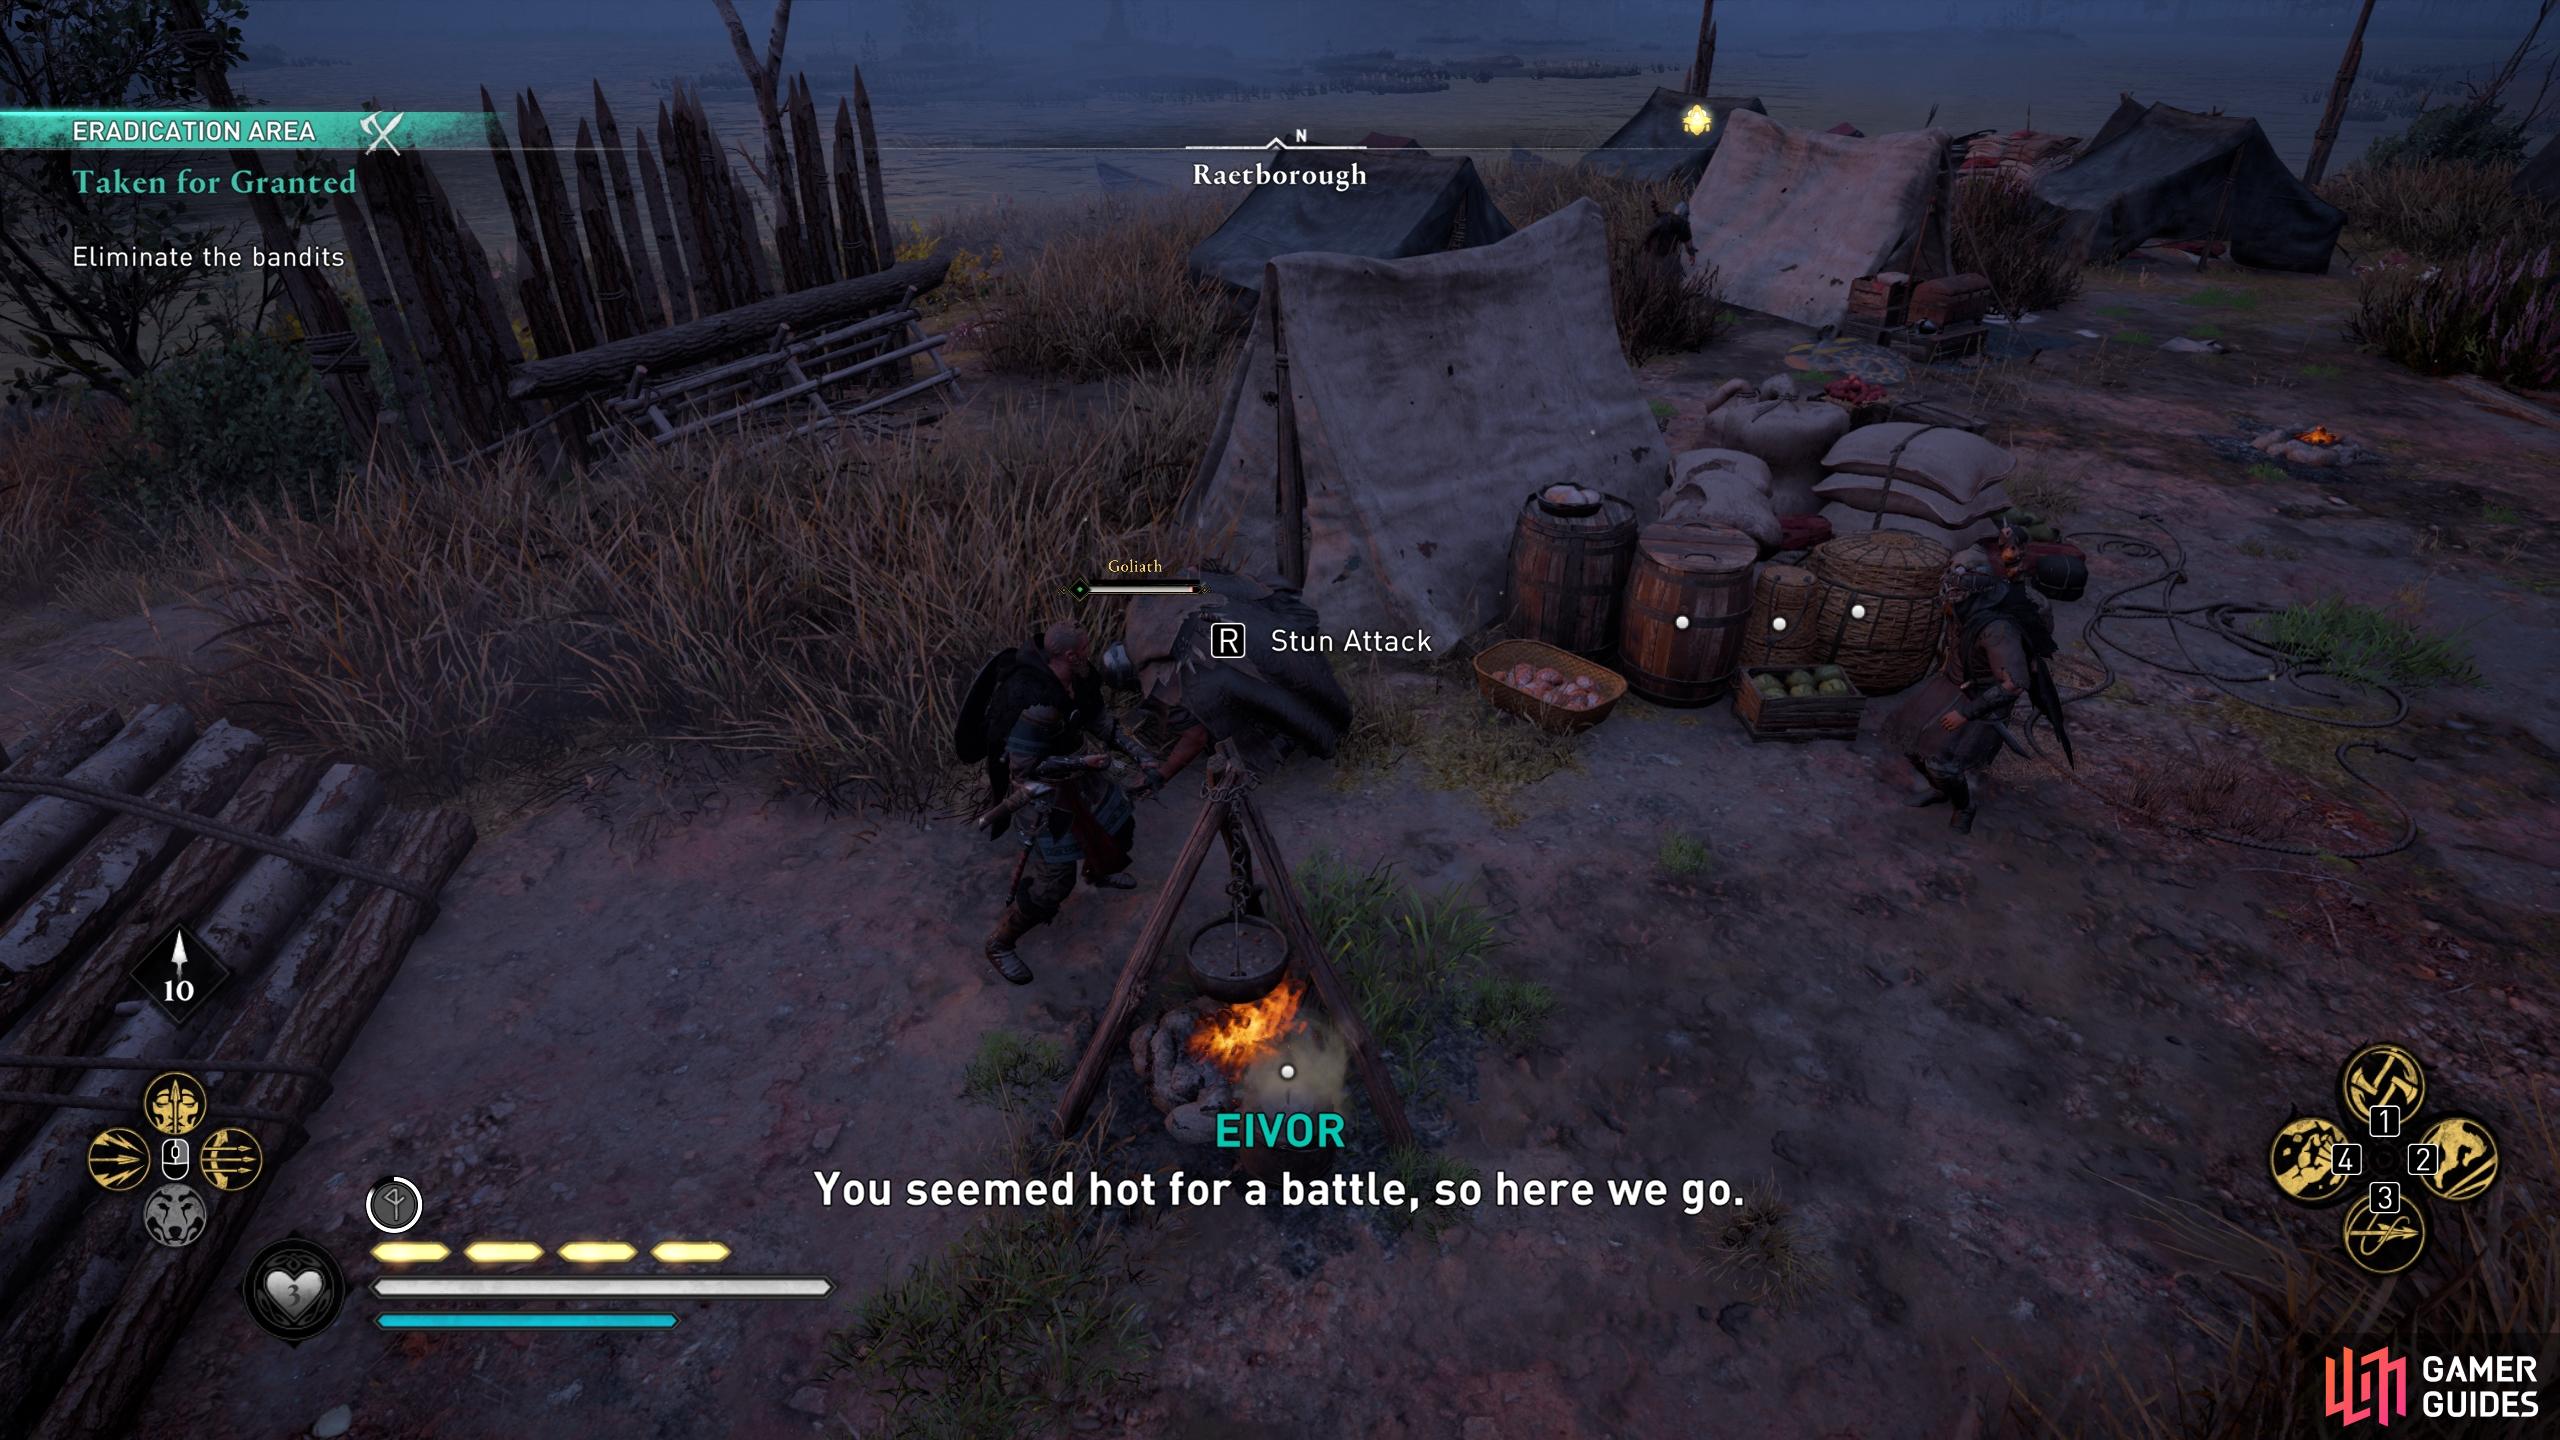  You'll face one Goliath and a number of regular bandits in the camp.